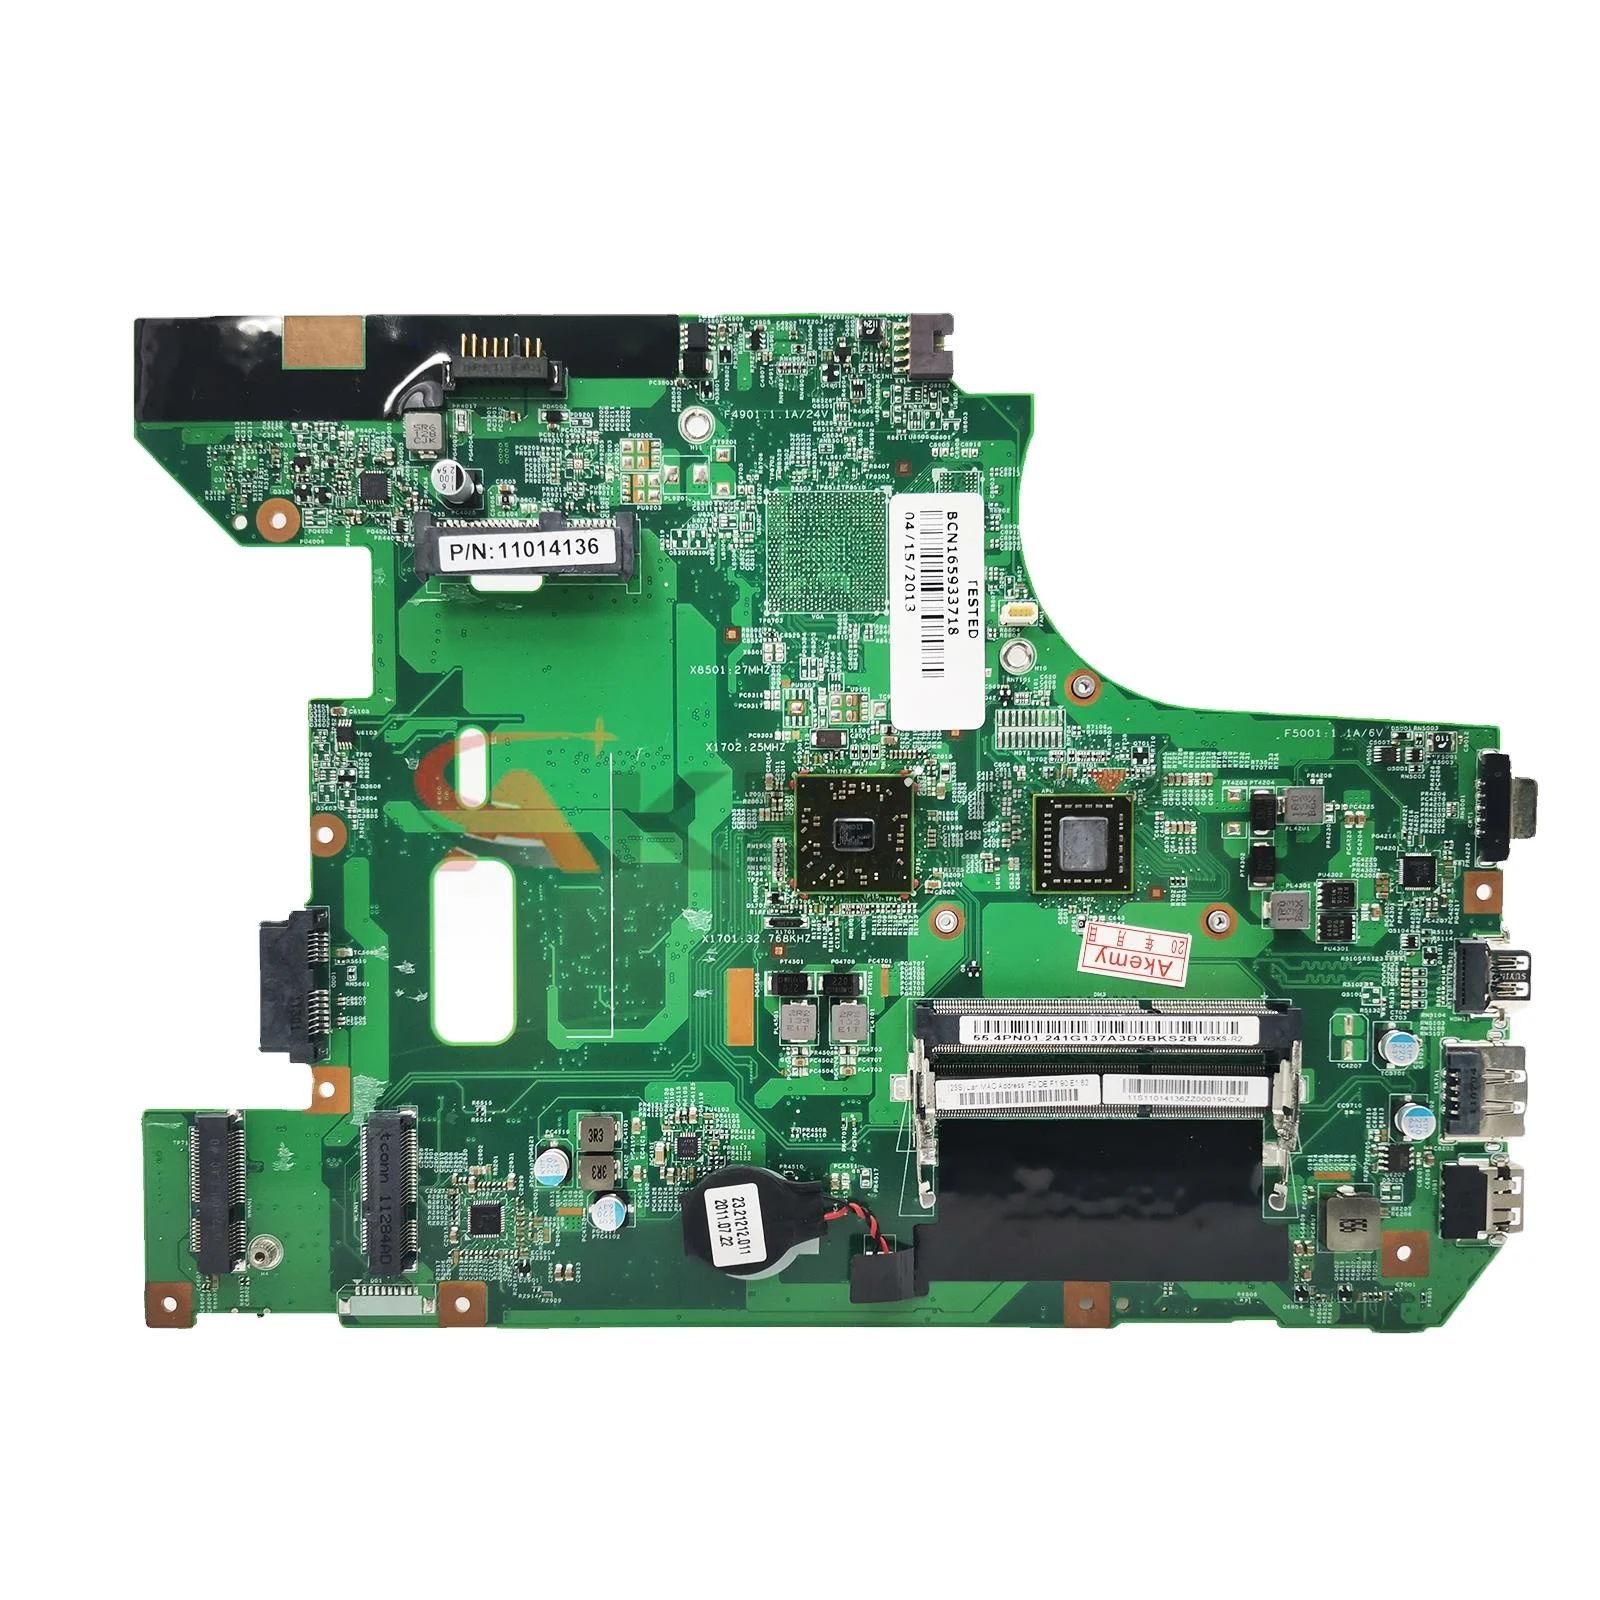 

48.4VV01.011 Mainboard For Lenovo ideapad B575 B575E laptop motherboard DDR3 with AMD CPU 100% fully tested